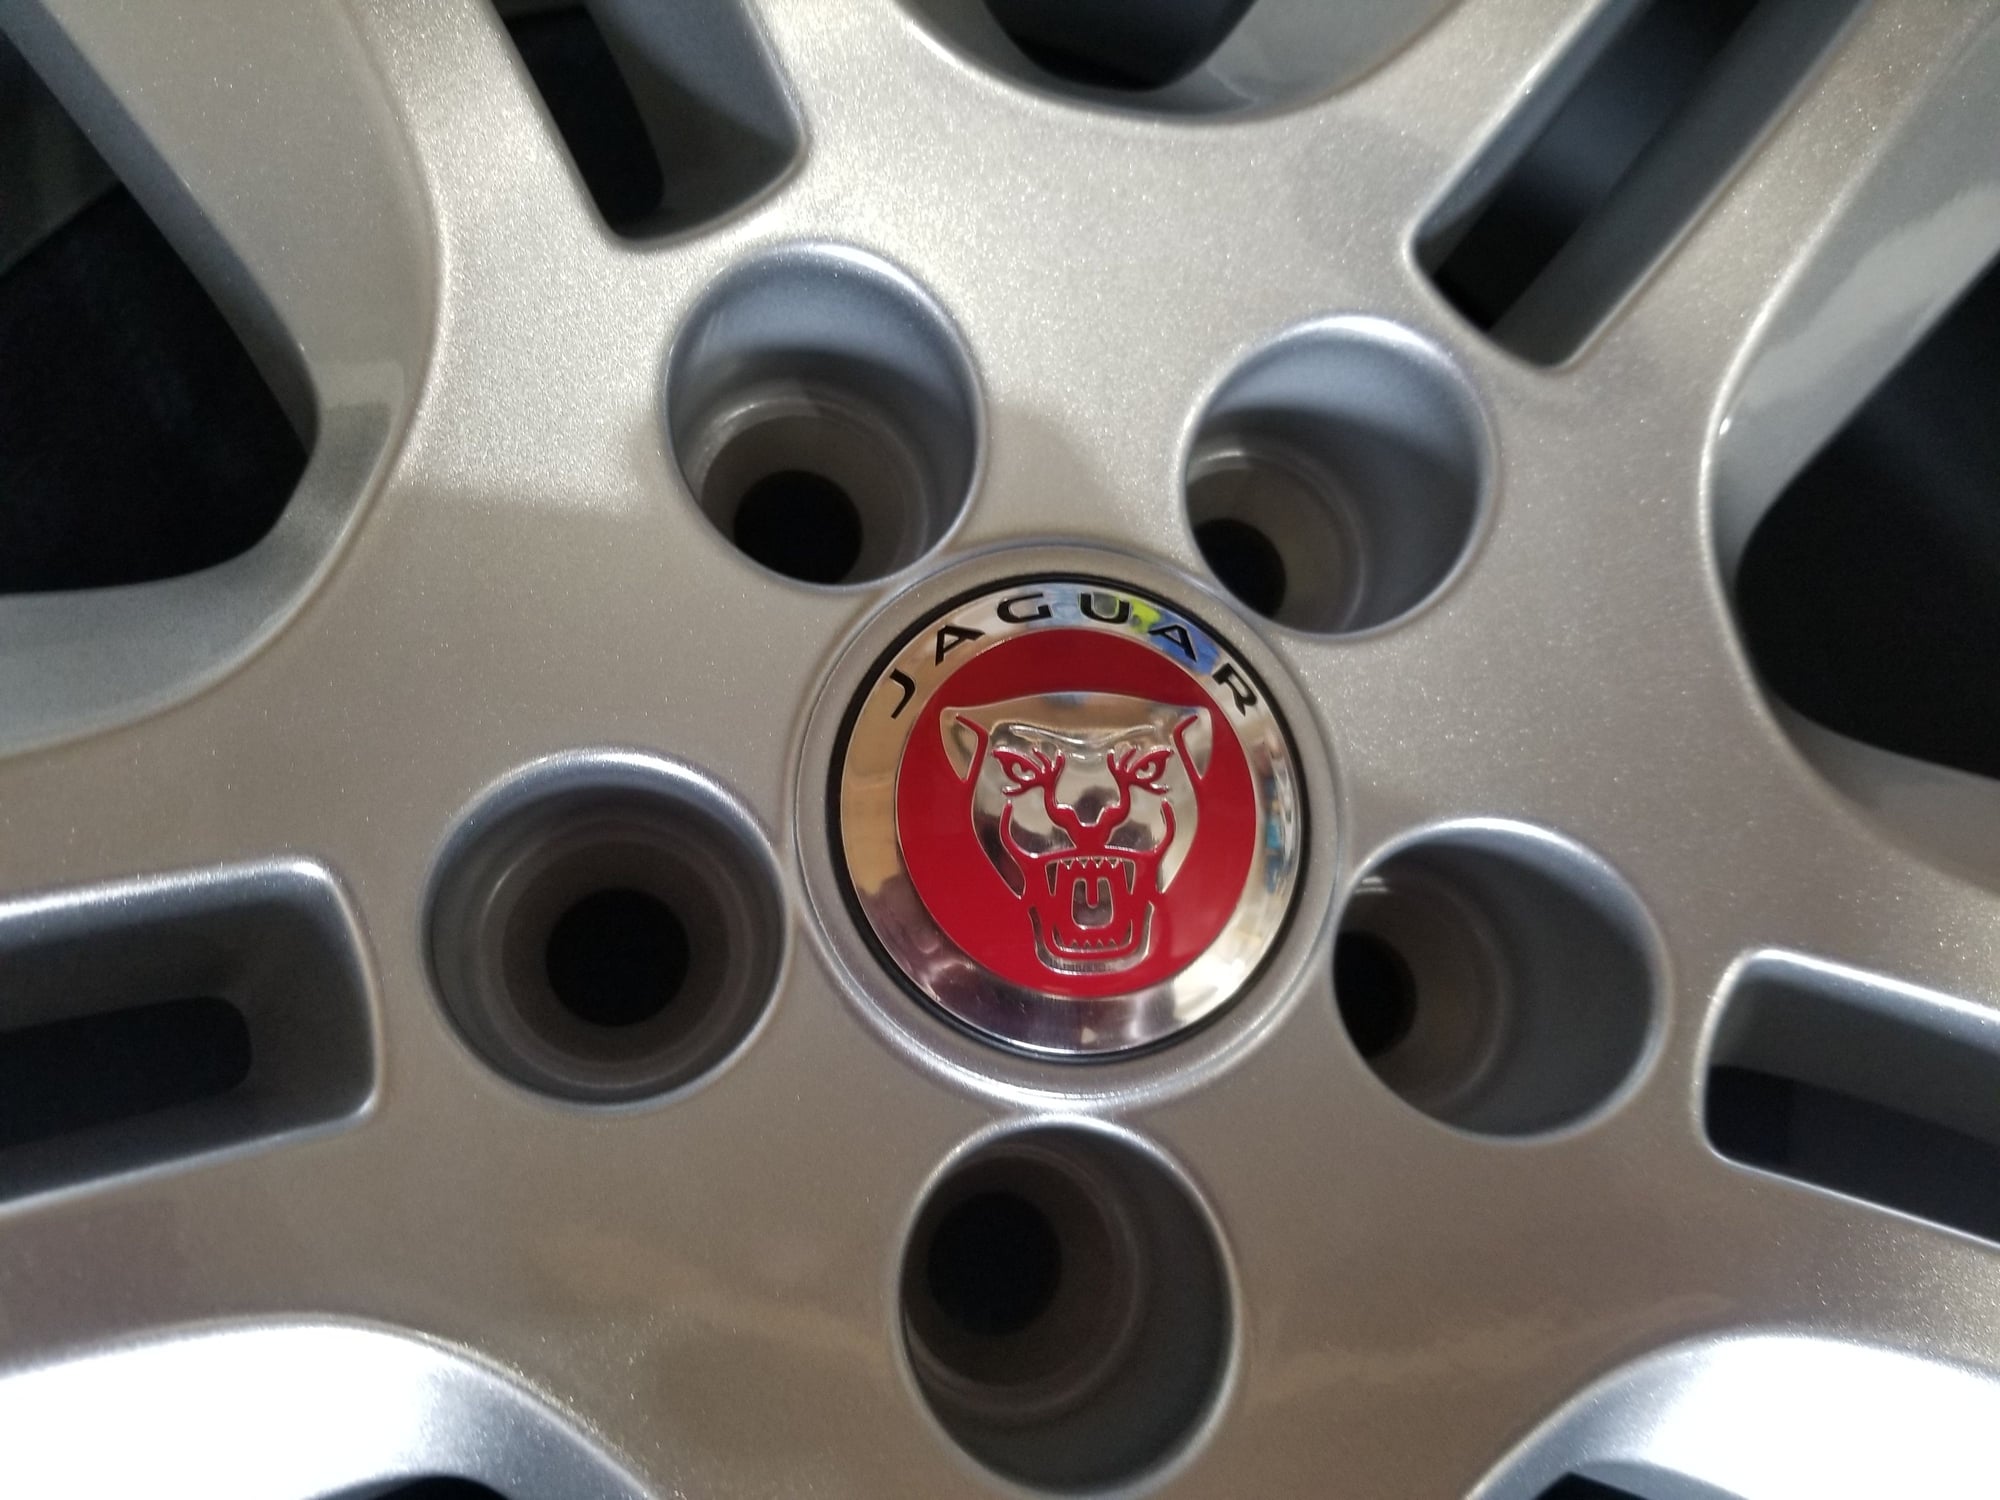 Wheels and Tires/Axles - Jaguar 20 Inch "Templar" Single Rim (Brand new in box) With TPMS - Canada Listing - New - Toronto, ON M4Y1R5, Canada